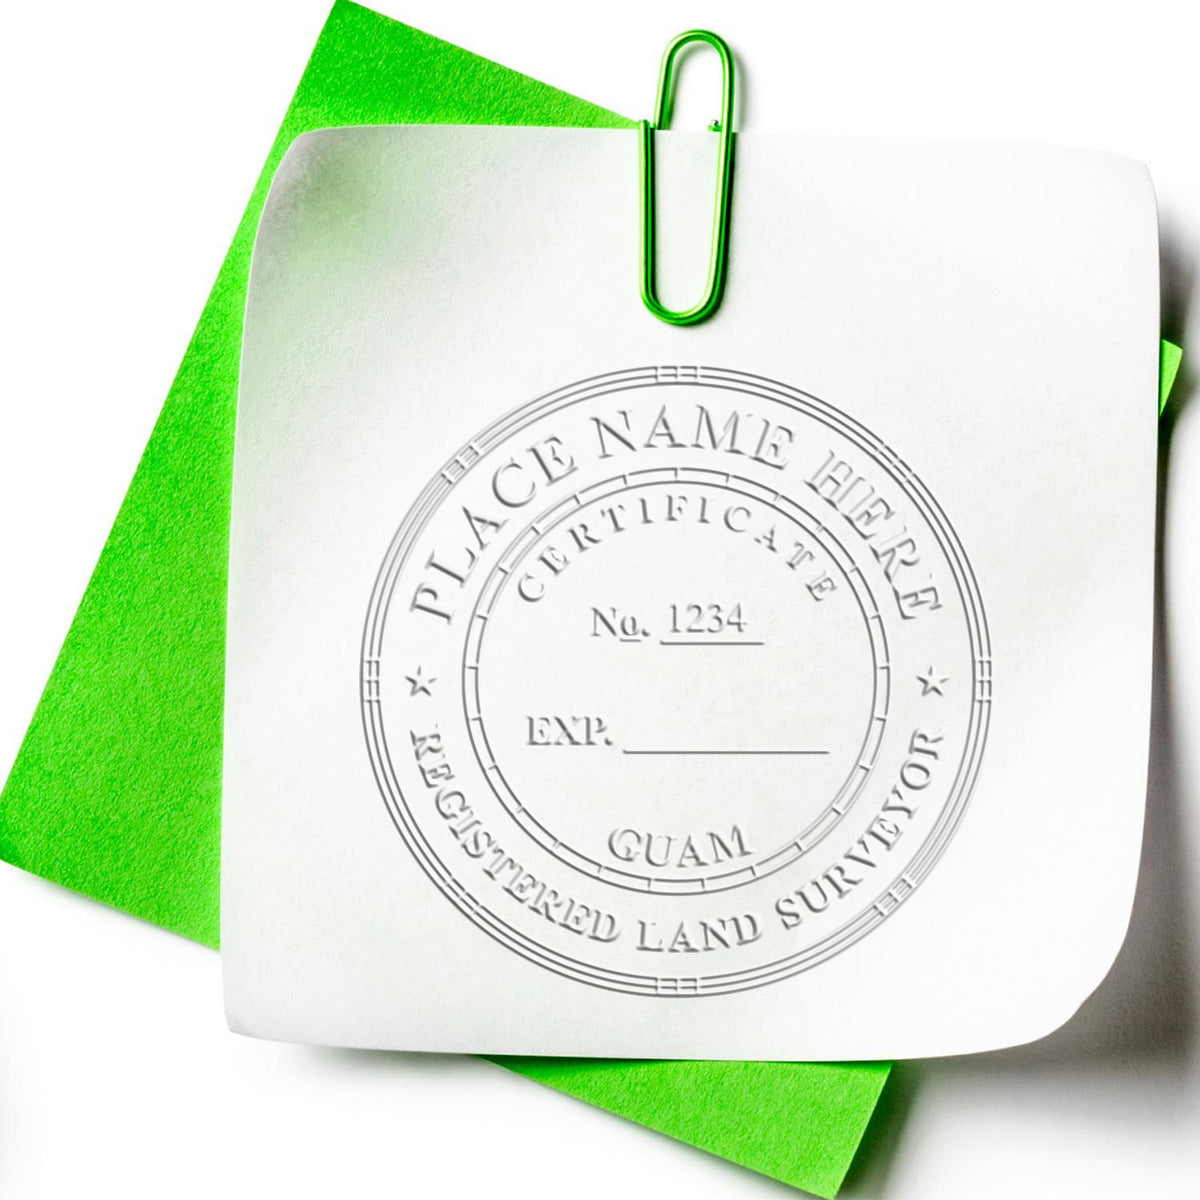 The Long Reach Guam Land Surveyor Seal stamp impression comes to life with a crisp, detailed photo on paper - showcasing true professional quality.